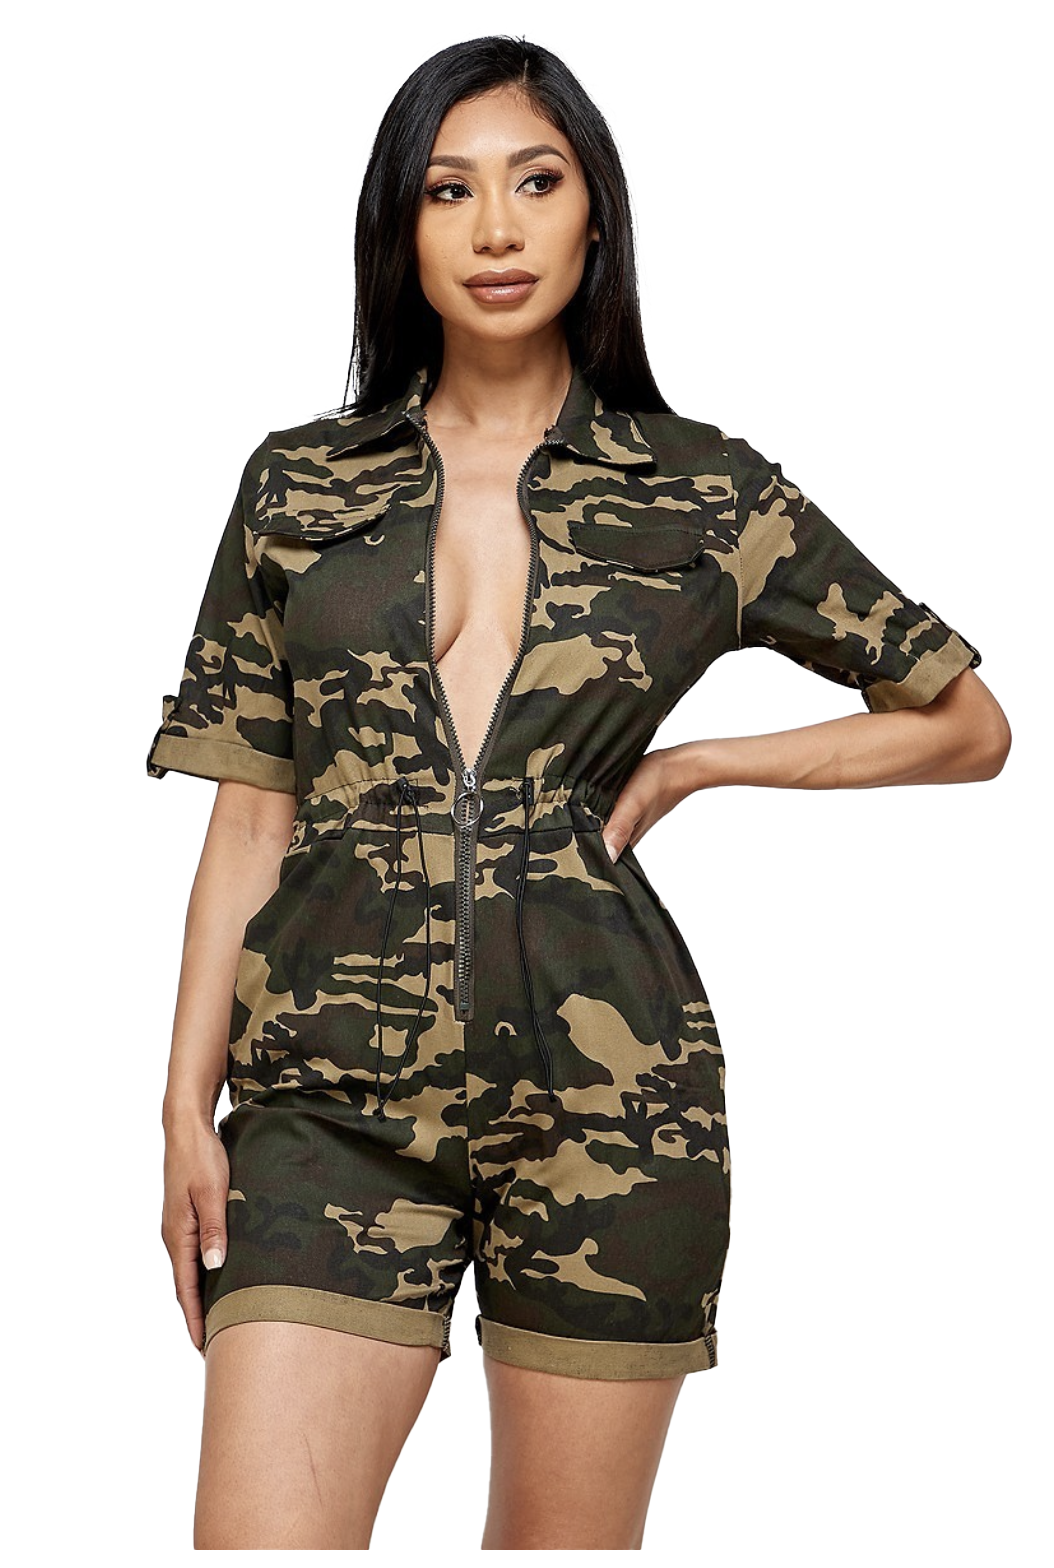 The Camouflage Romper